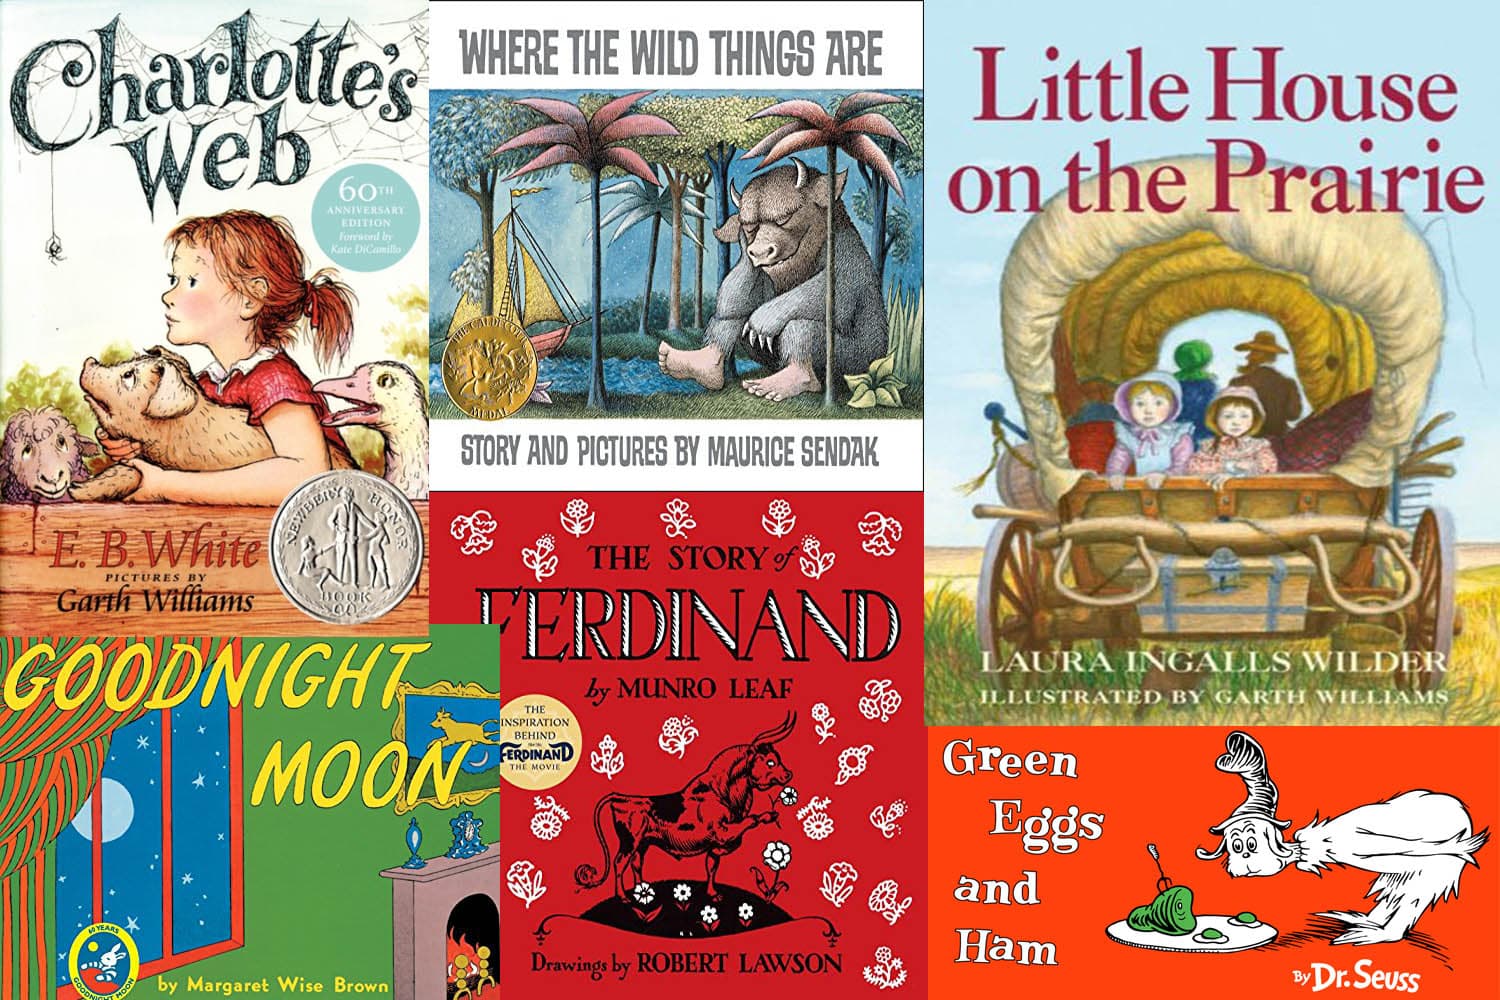 Children's titles mentioned in Bruce Handy's book "Wild Things: The Joy of Reading Children’s Literature as an Adult."